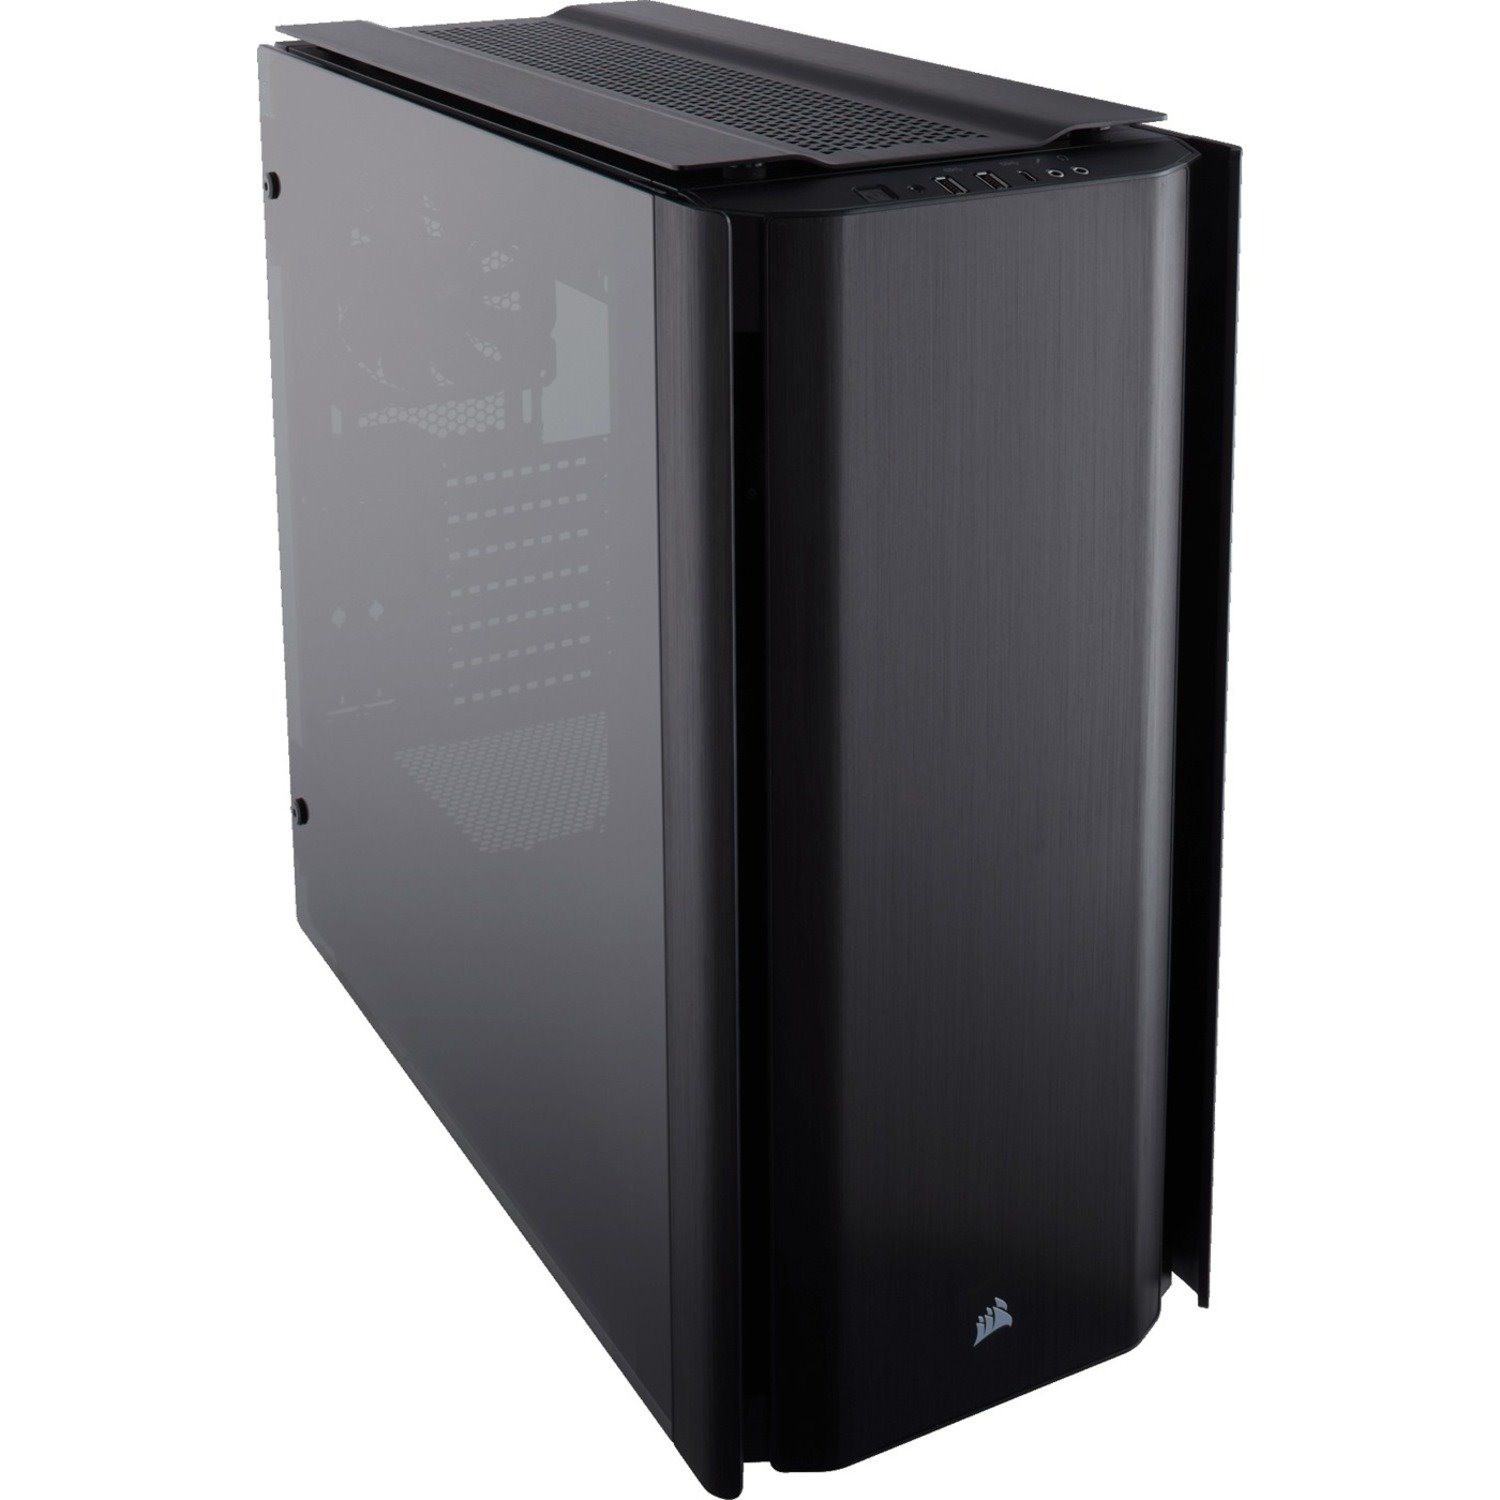 Corsair Obsidian 500D Computer Case - ATX, Micro ATX, Mini ITX Motherboard Supported - Mid-tower - Tempered Glass, Aluminium